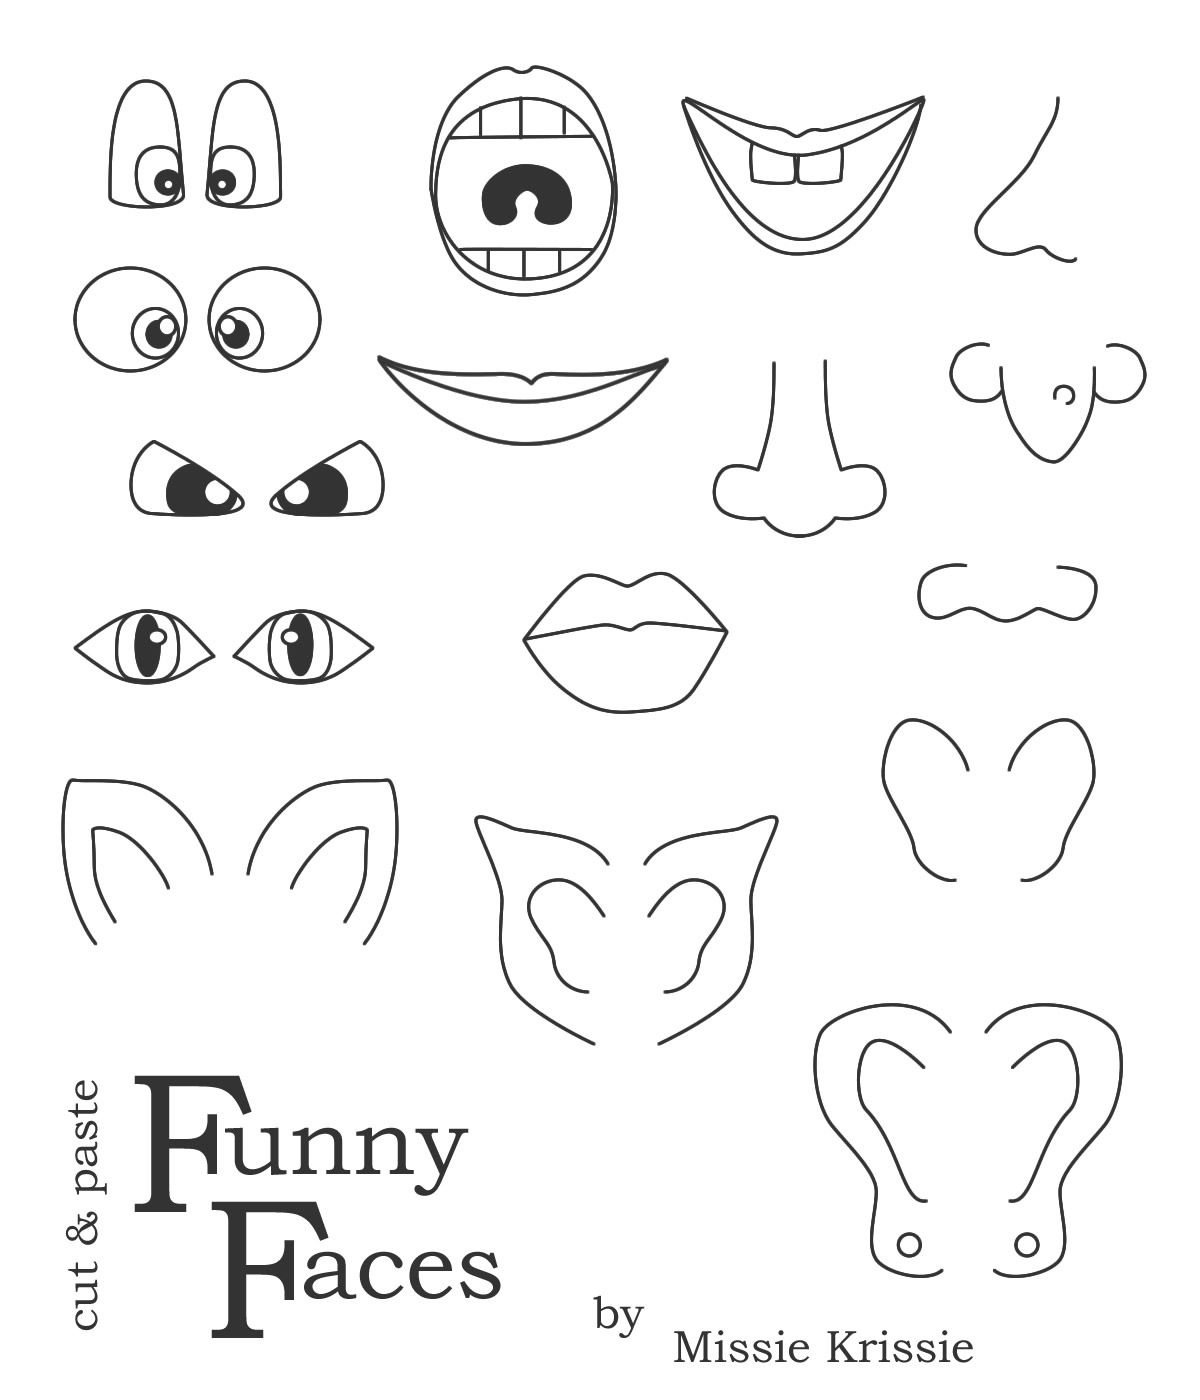 Printable Funny Face Images |  , Wait For It To Load, Right Click - Printable Face Puzzle